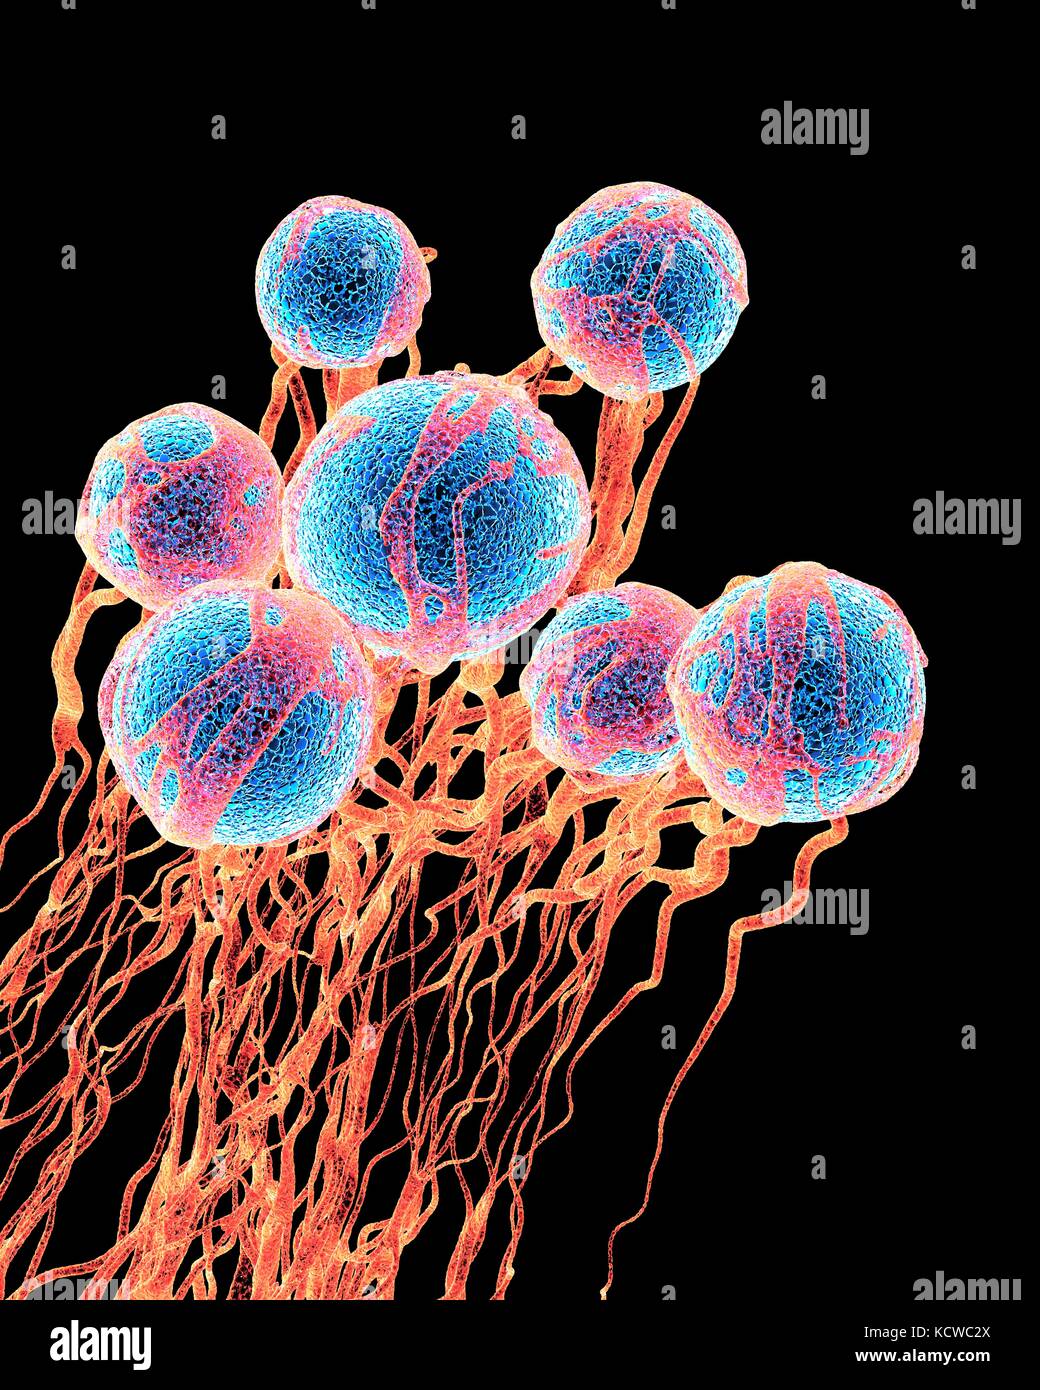 Cancer cells. Computer illustration of cancer cells, showing the blood vessel formation providing the the cells with oxygens and nutrigens. The cells with their nuclei are shown in blue. Stock Photo